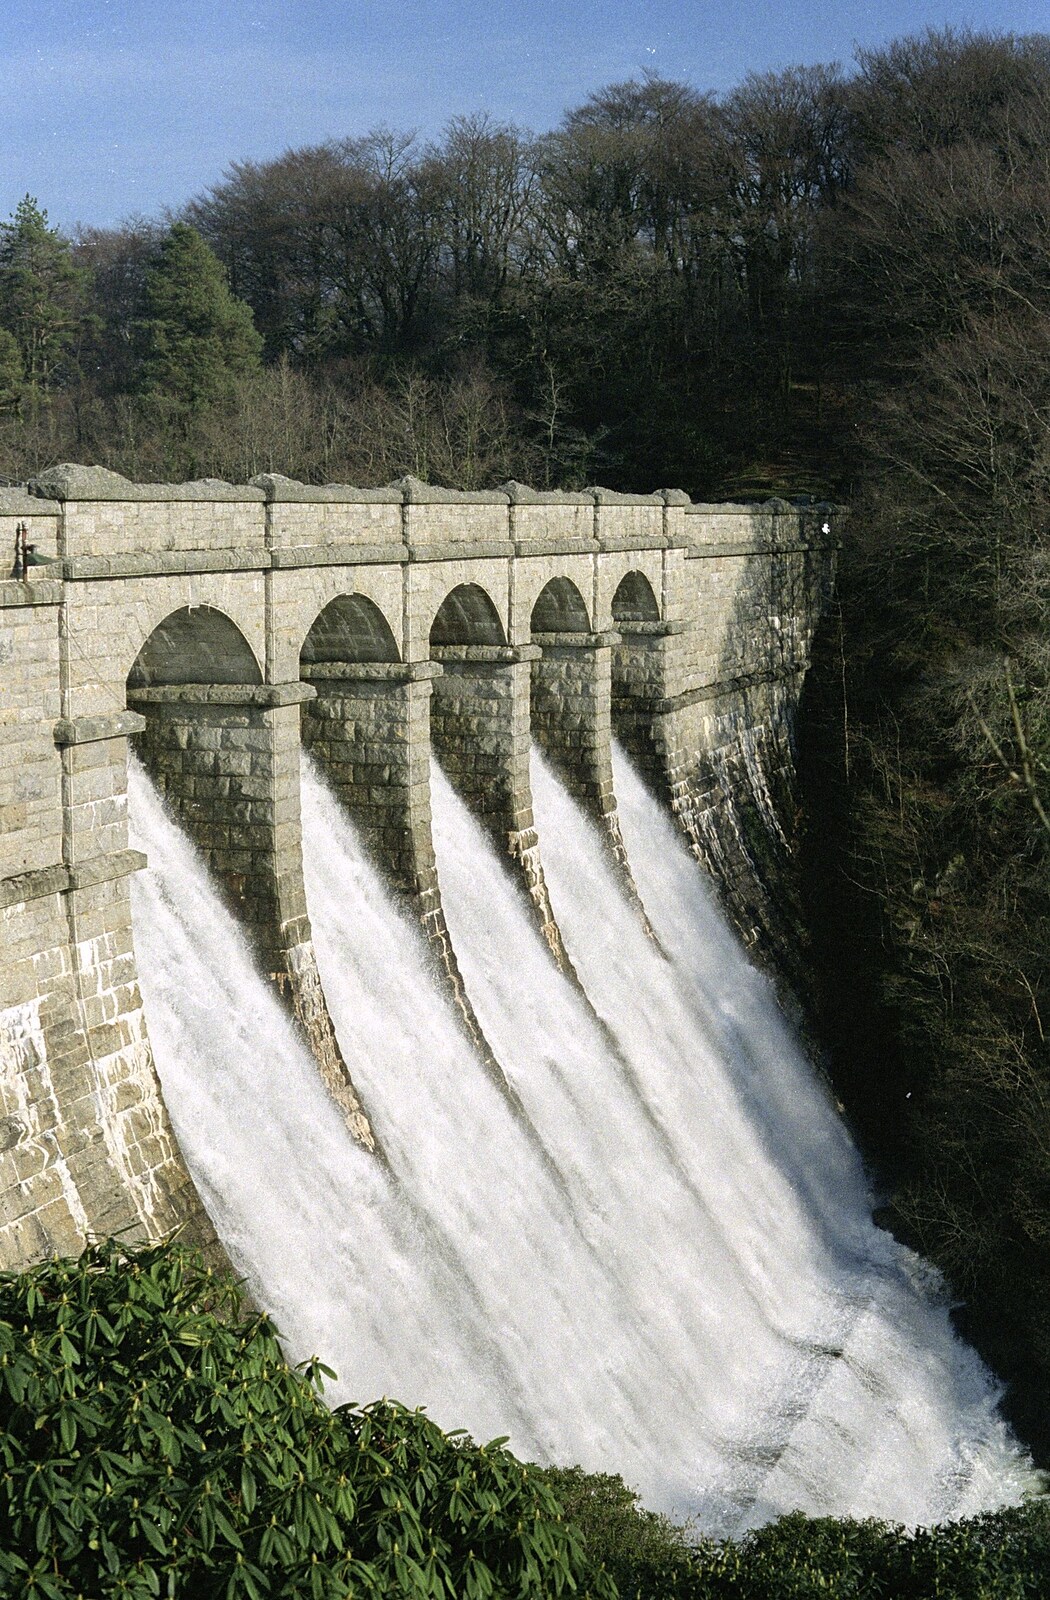 A Trip to Plymouth and Bristol, Avon and Devon - 18th February 1990: The dam at Burrator is in full flow